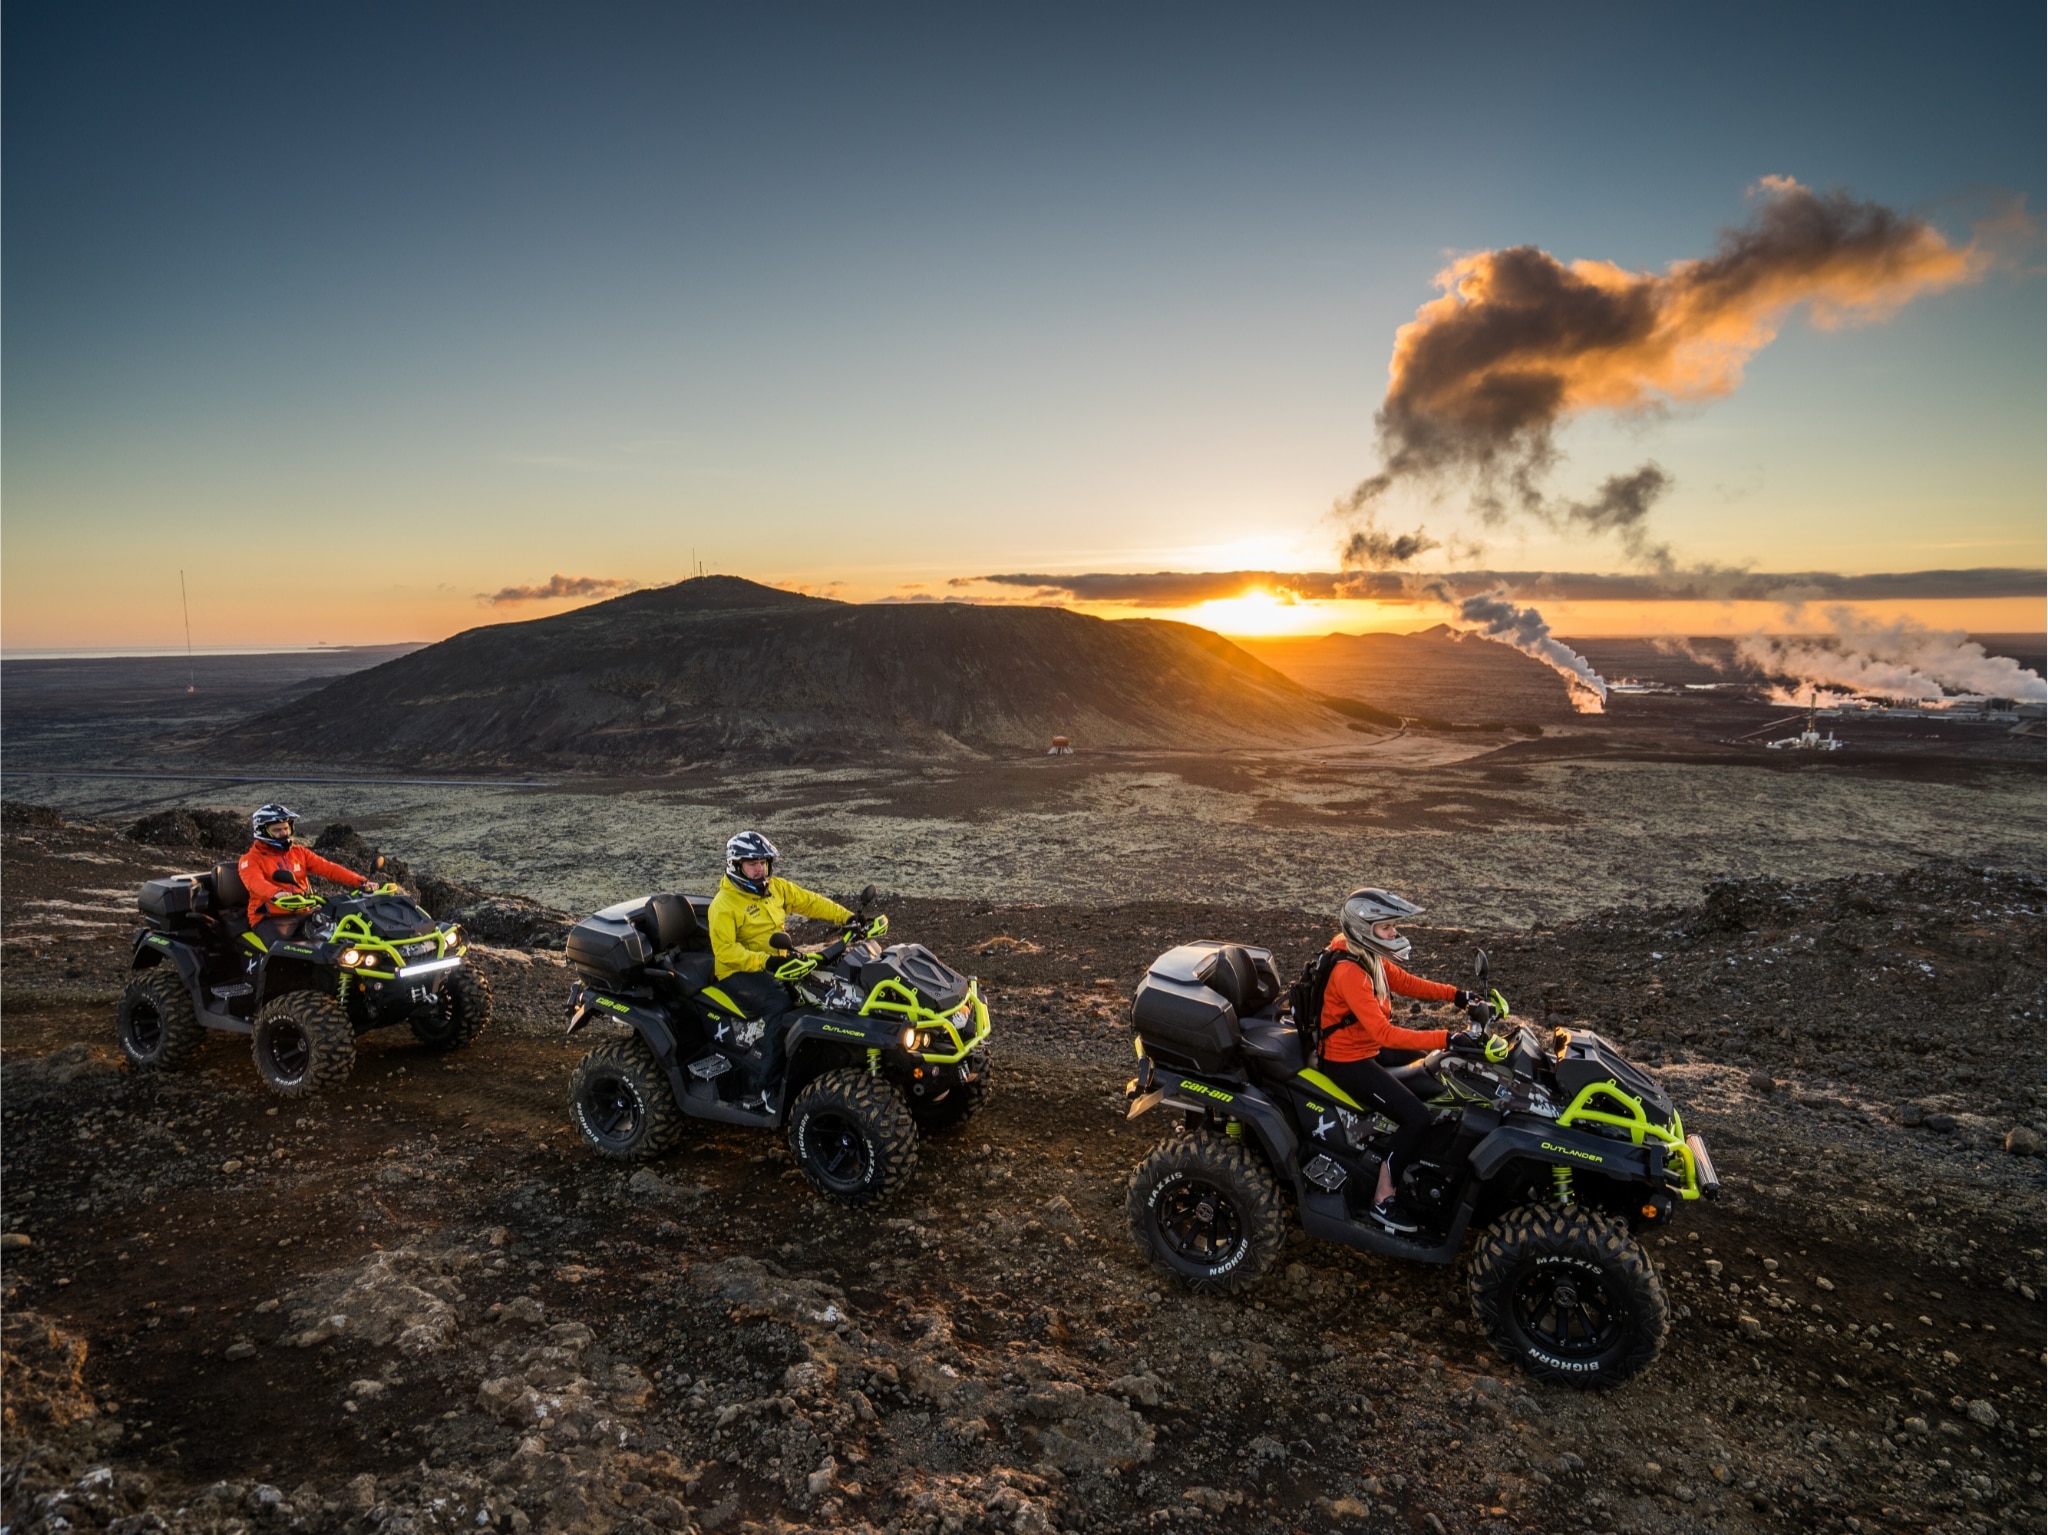 🌄 Uncharted Society Welcomes 4x4 Adventure Tours to Explore Iceland's Mesmerizing Landscape! 🚙